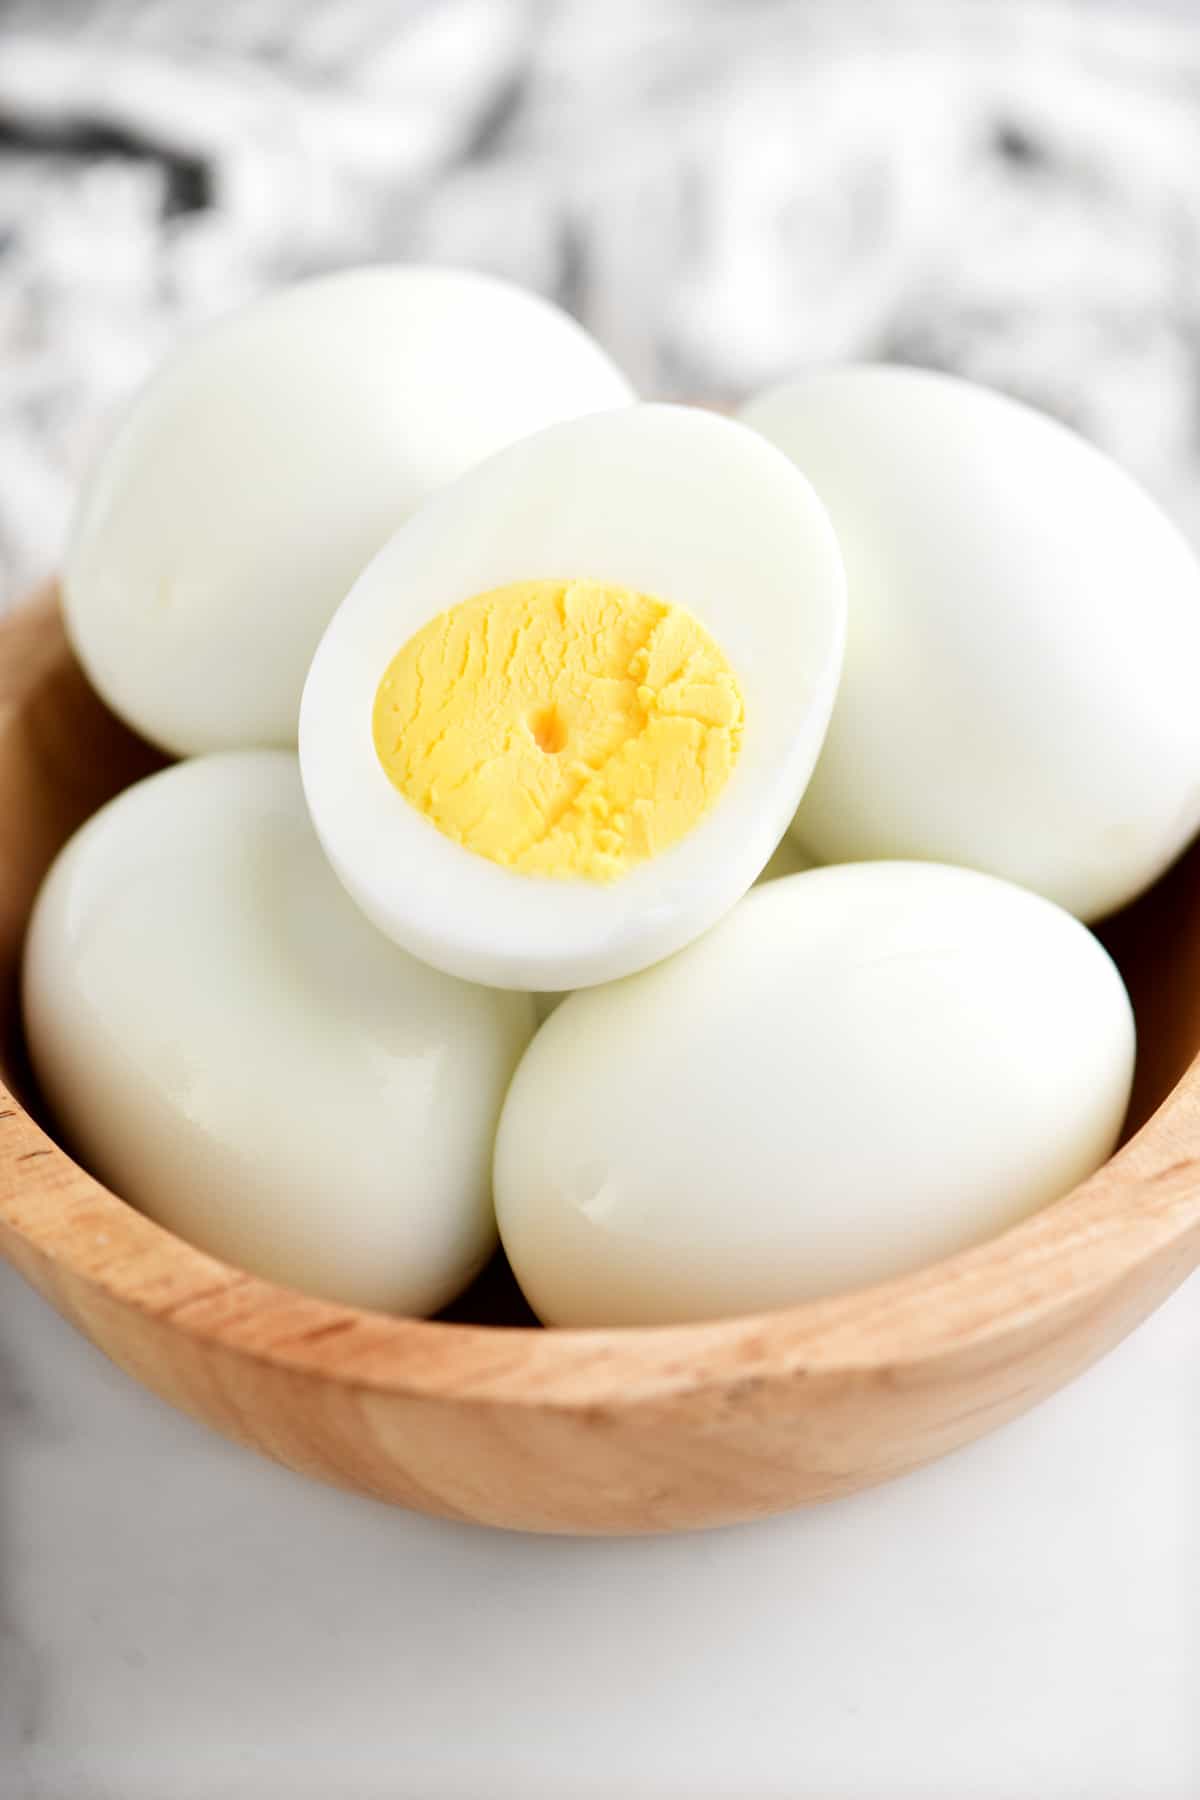 How To Boil Eggs In Egg Boiler?. So if you are searching for How